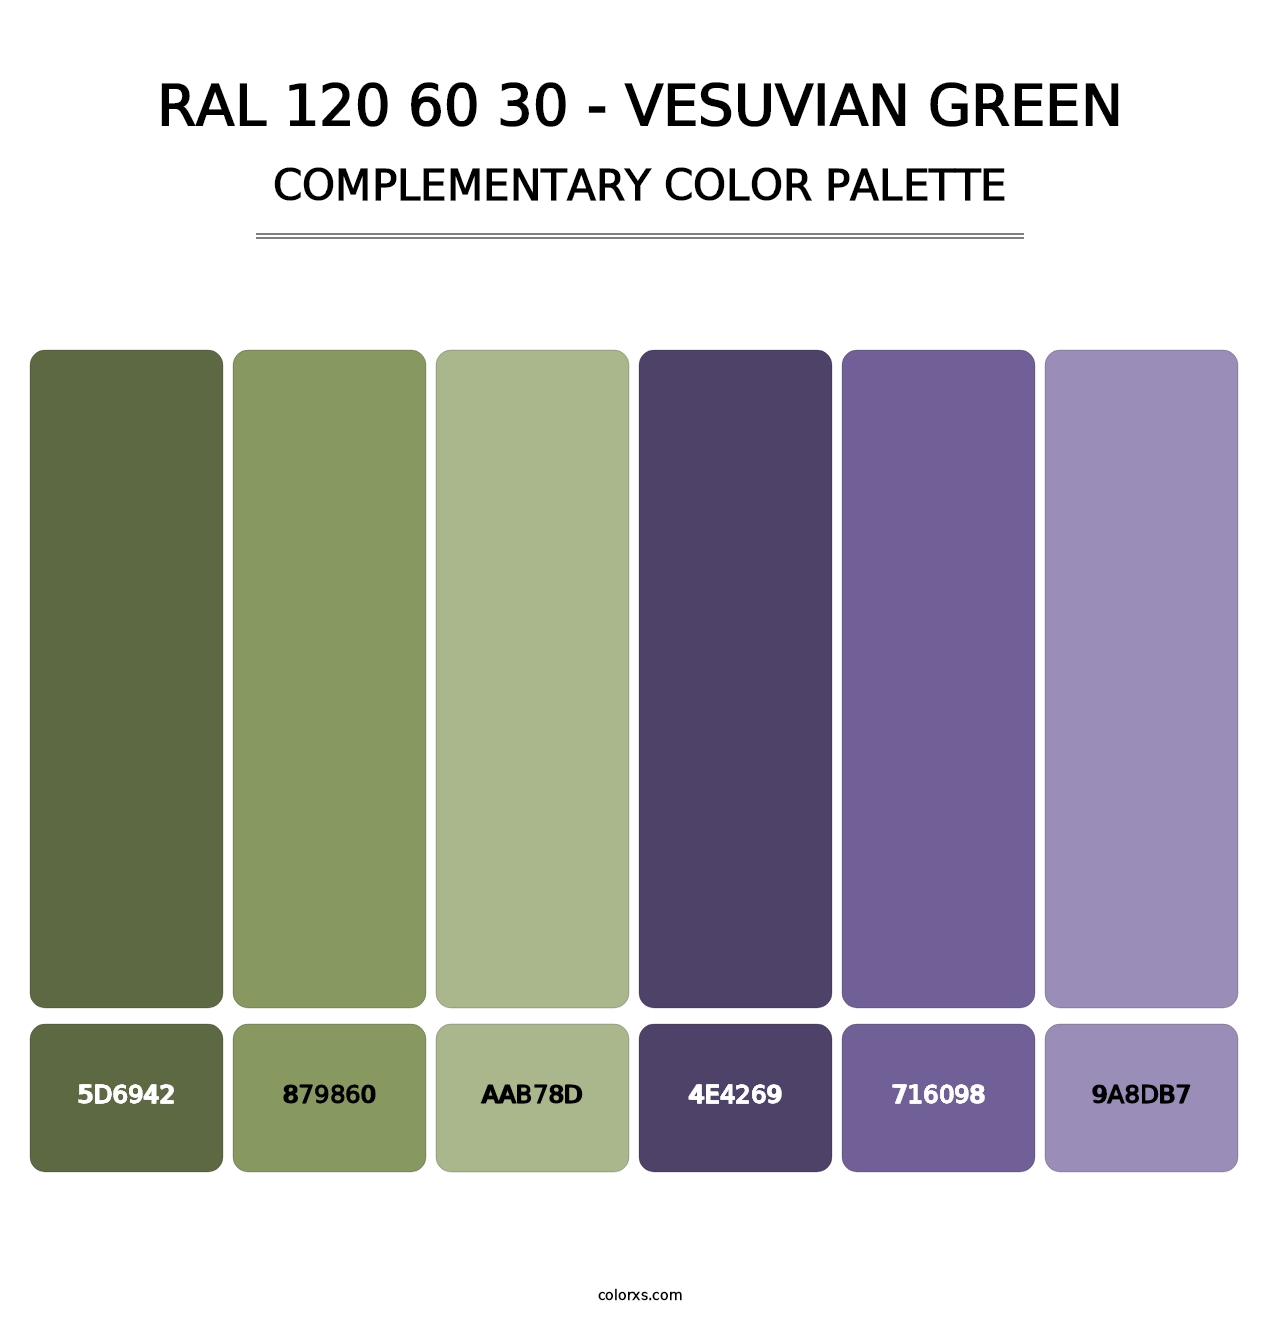 RAL 120 60 30 - Vesuvian Green - Complementary Color Palette